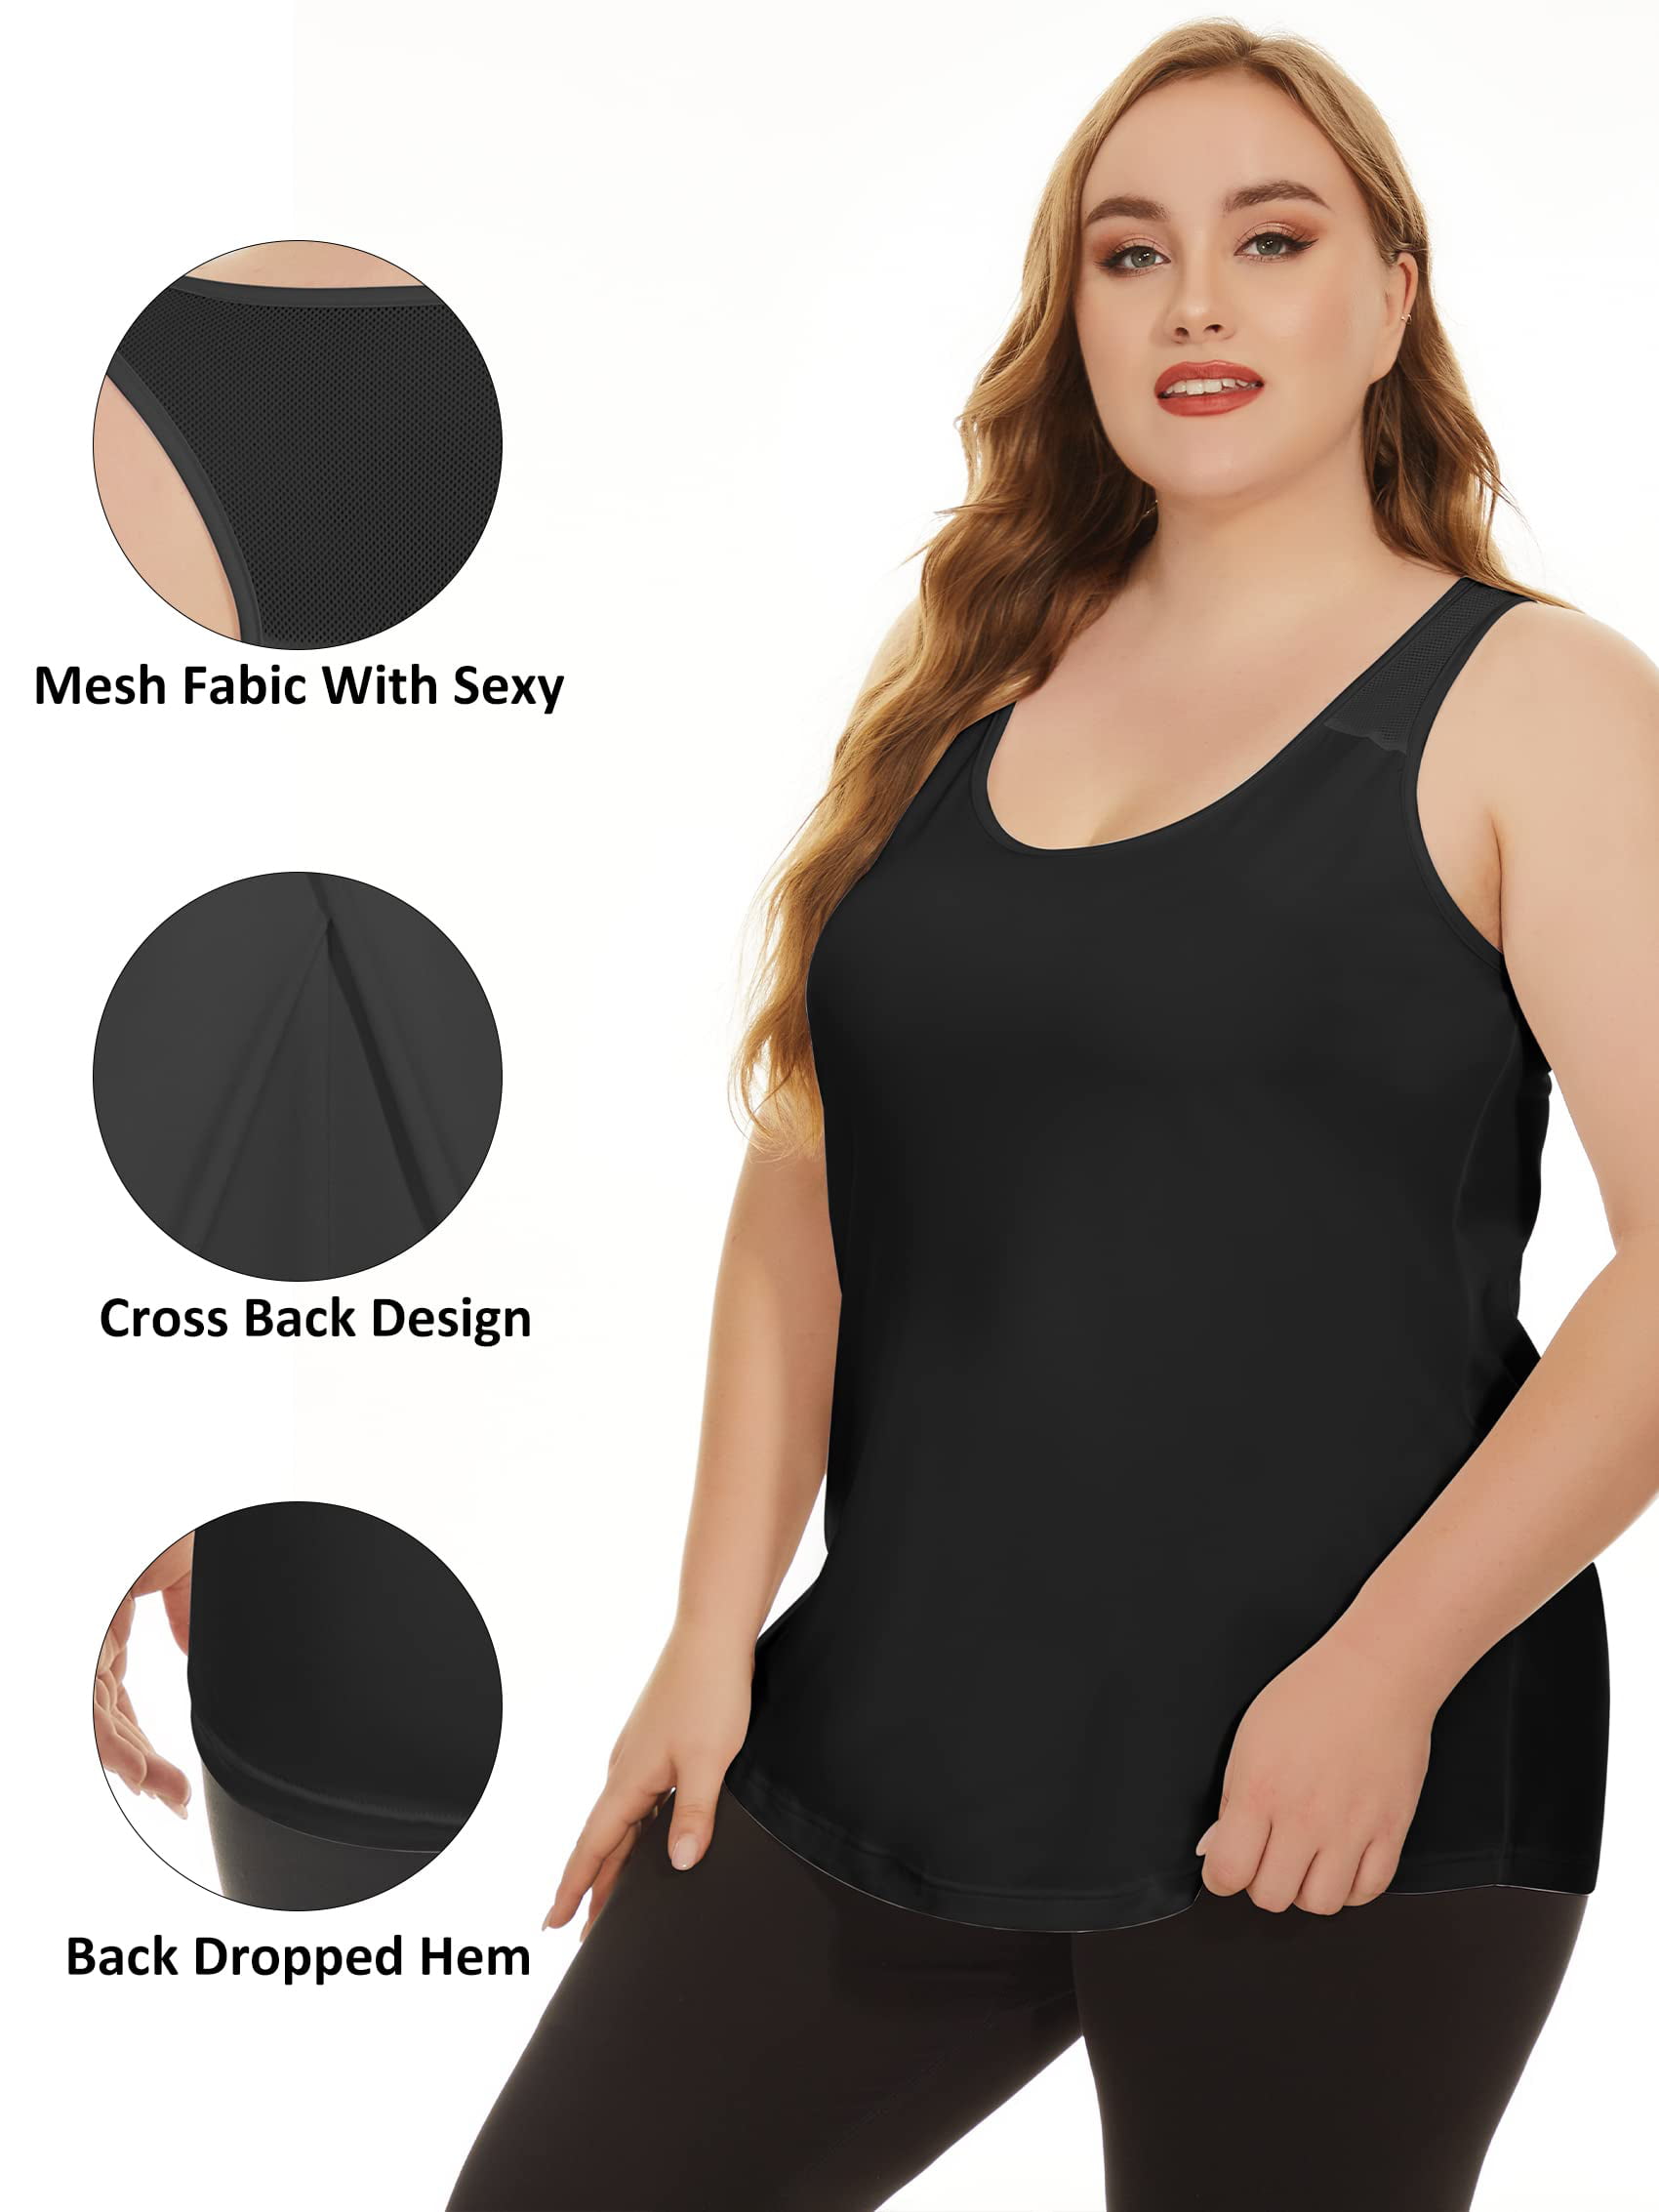  Pgyong Plus Size Tops For Women Workout Tops For Women